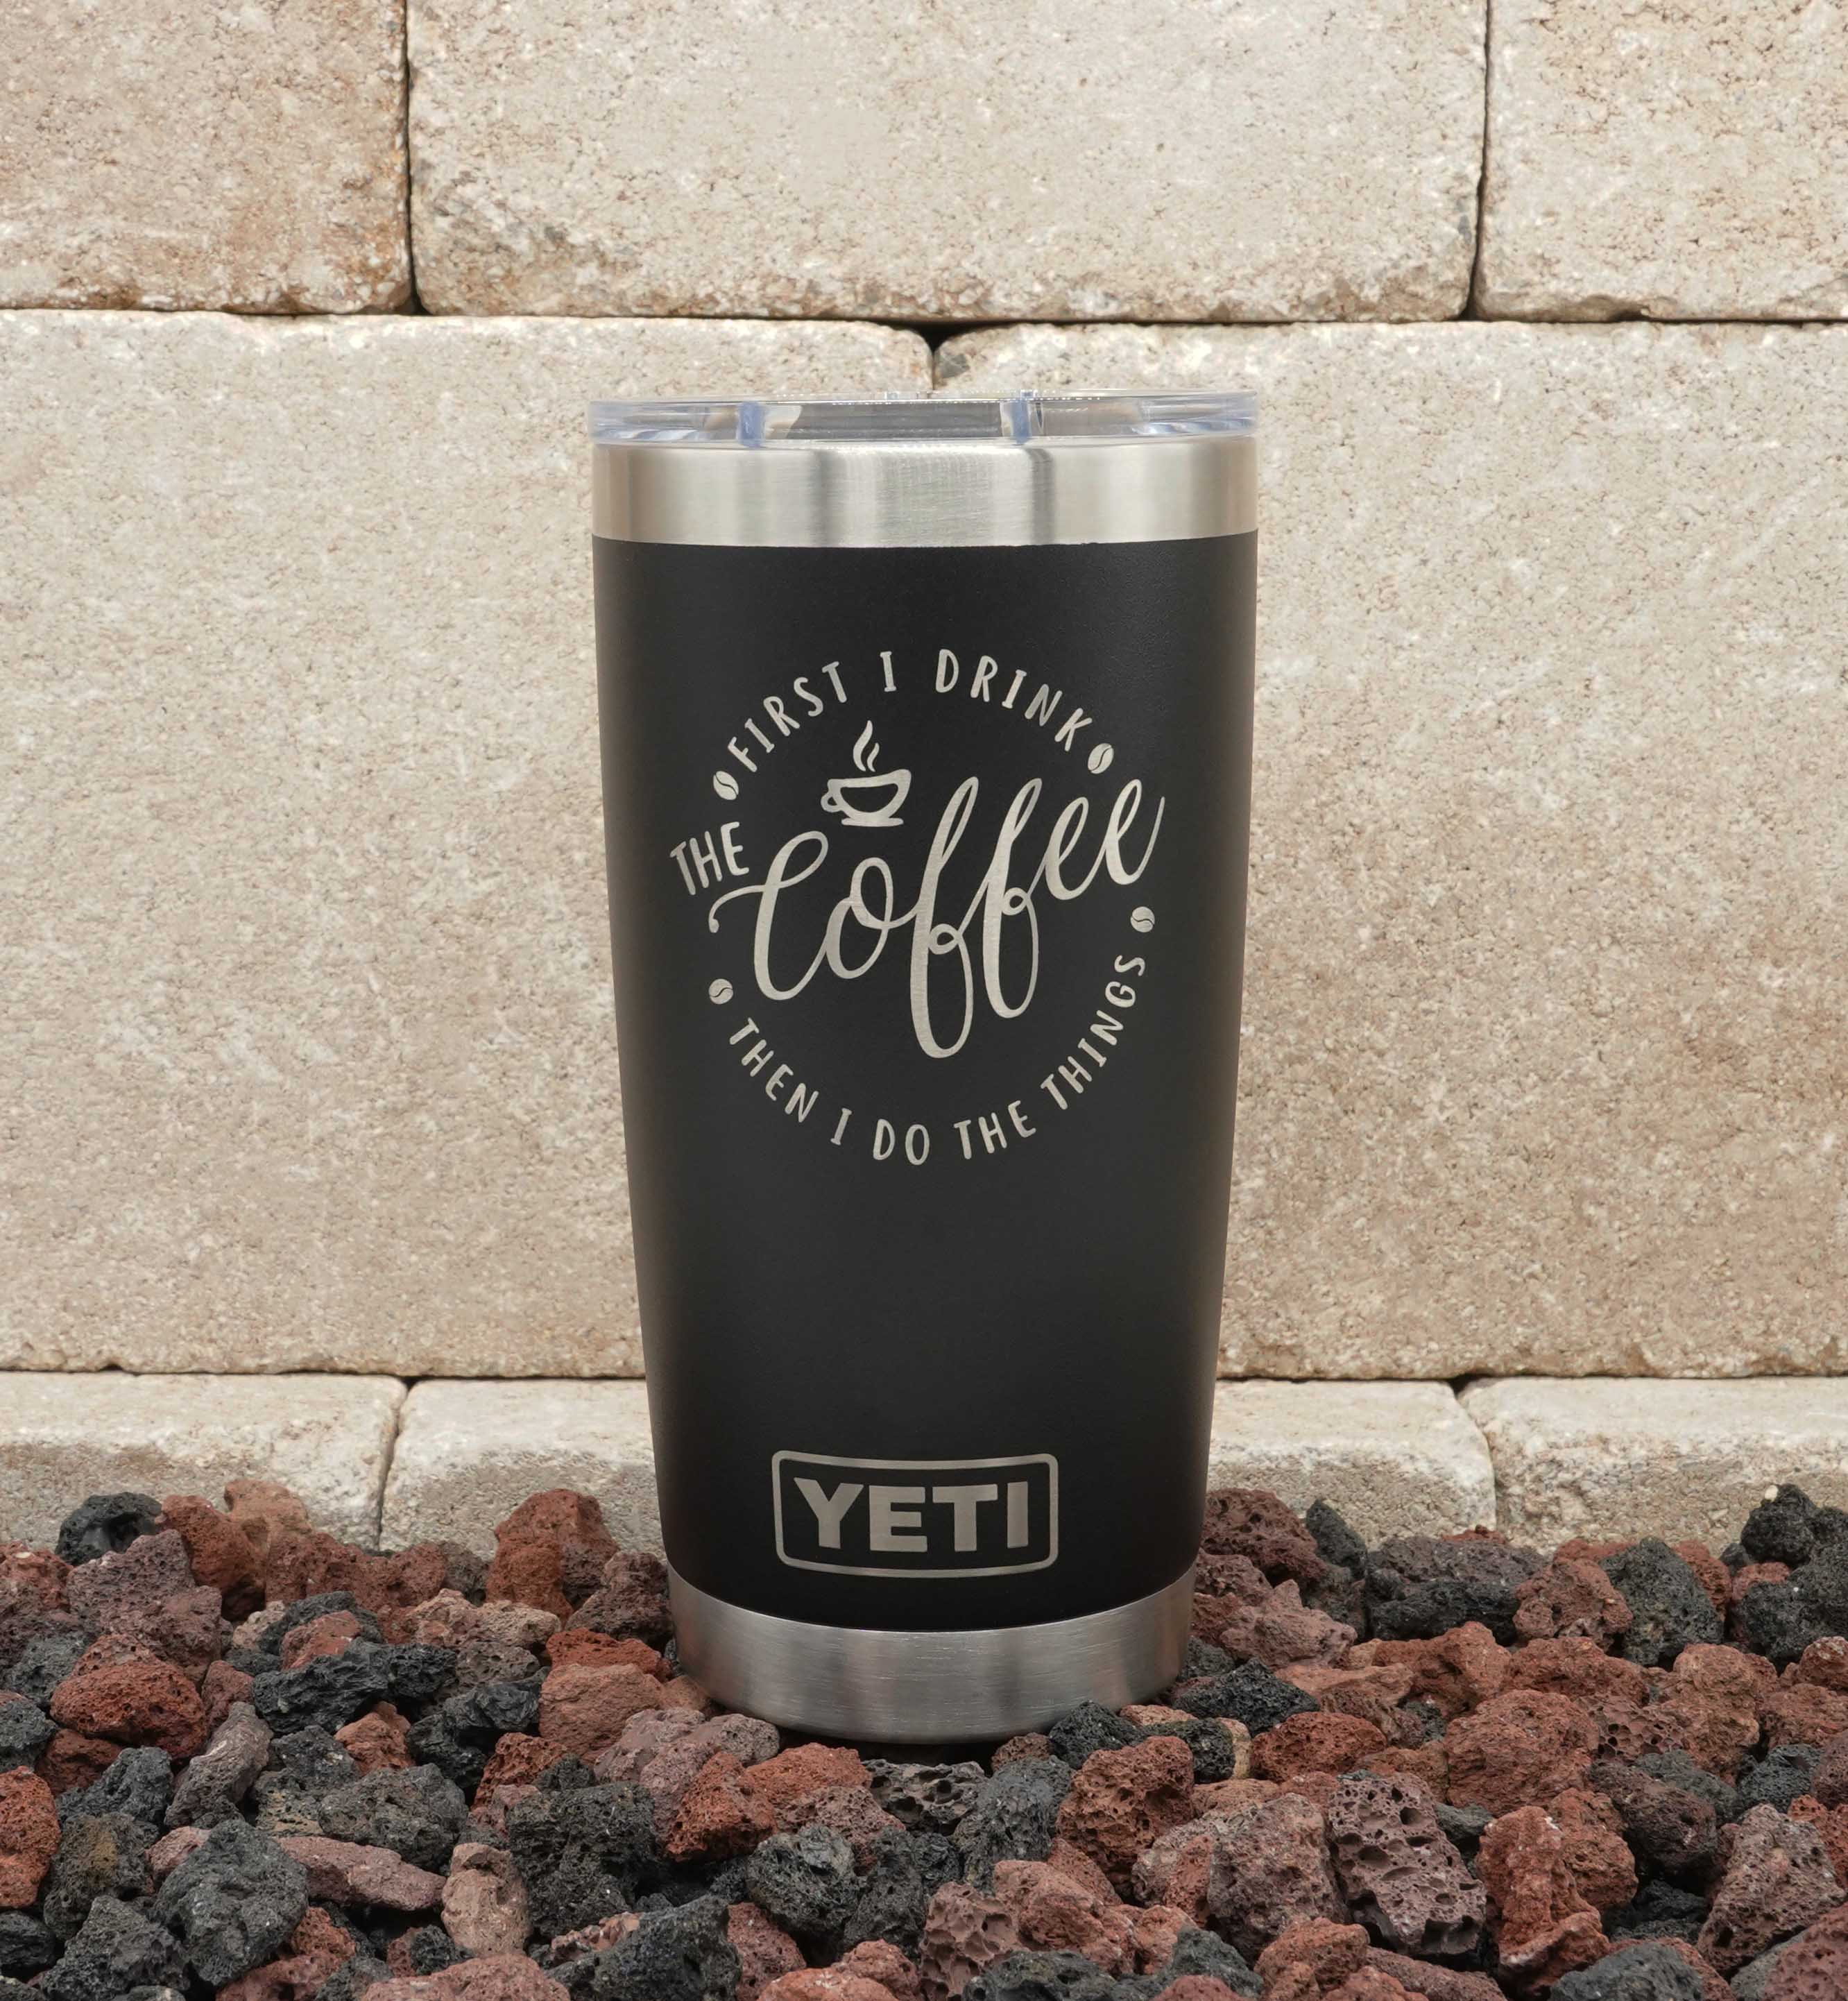 http://laseretchworks.com/cdn/shop/products/Coffee-Lovers-First-I-Drink-the-Coffee-Then-I-Do-the-Things-Yeti-Polar-Camel-tumblers.jpg?v=1675137634